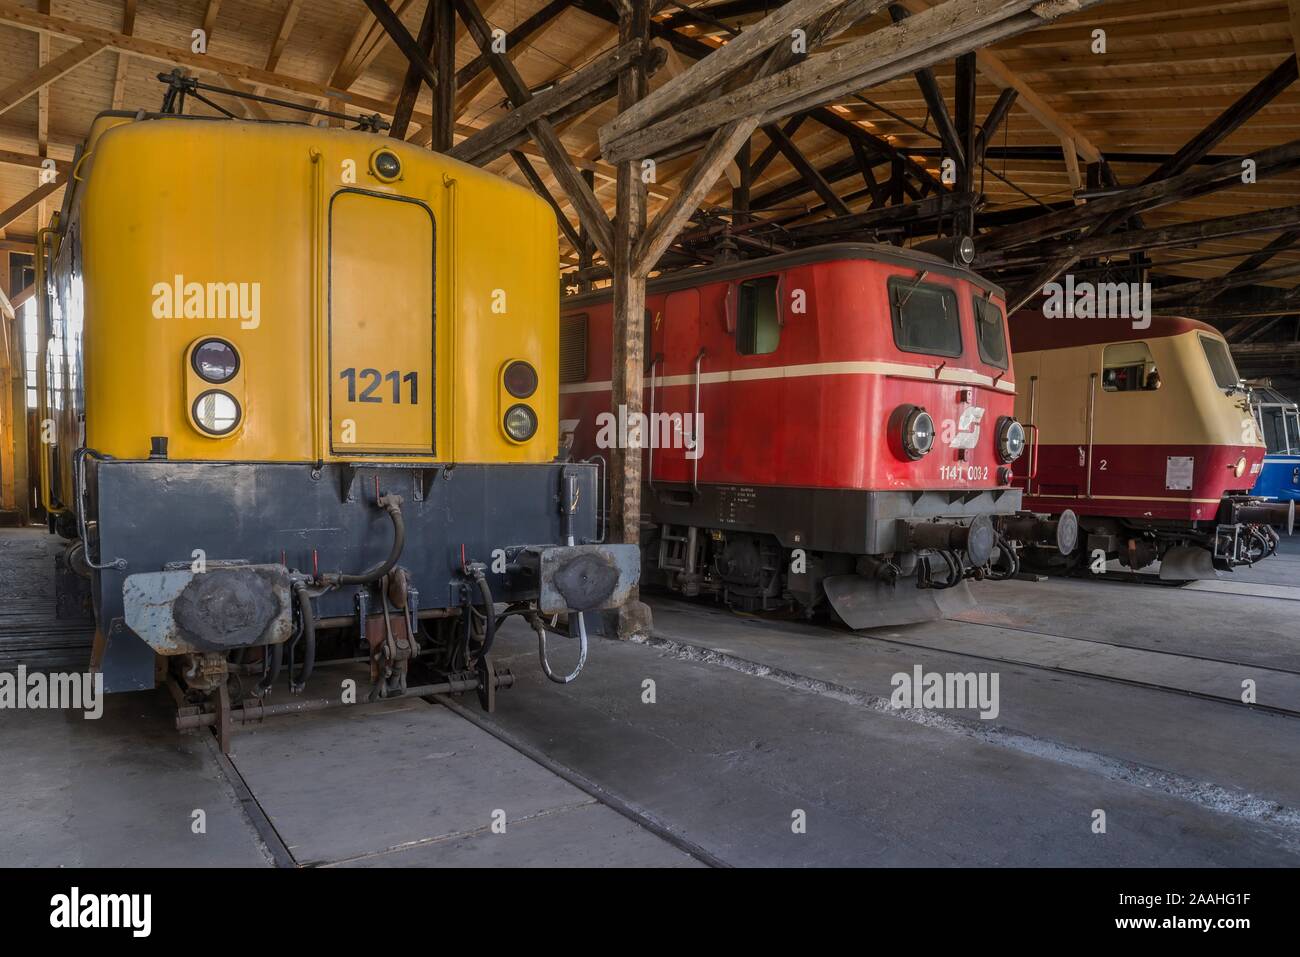 International locomotives, from left to right, Dutch electric locomotive 1211, OBB dual frequency locomotive, 1957, DB AG electric locomotive, class Stock Photo